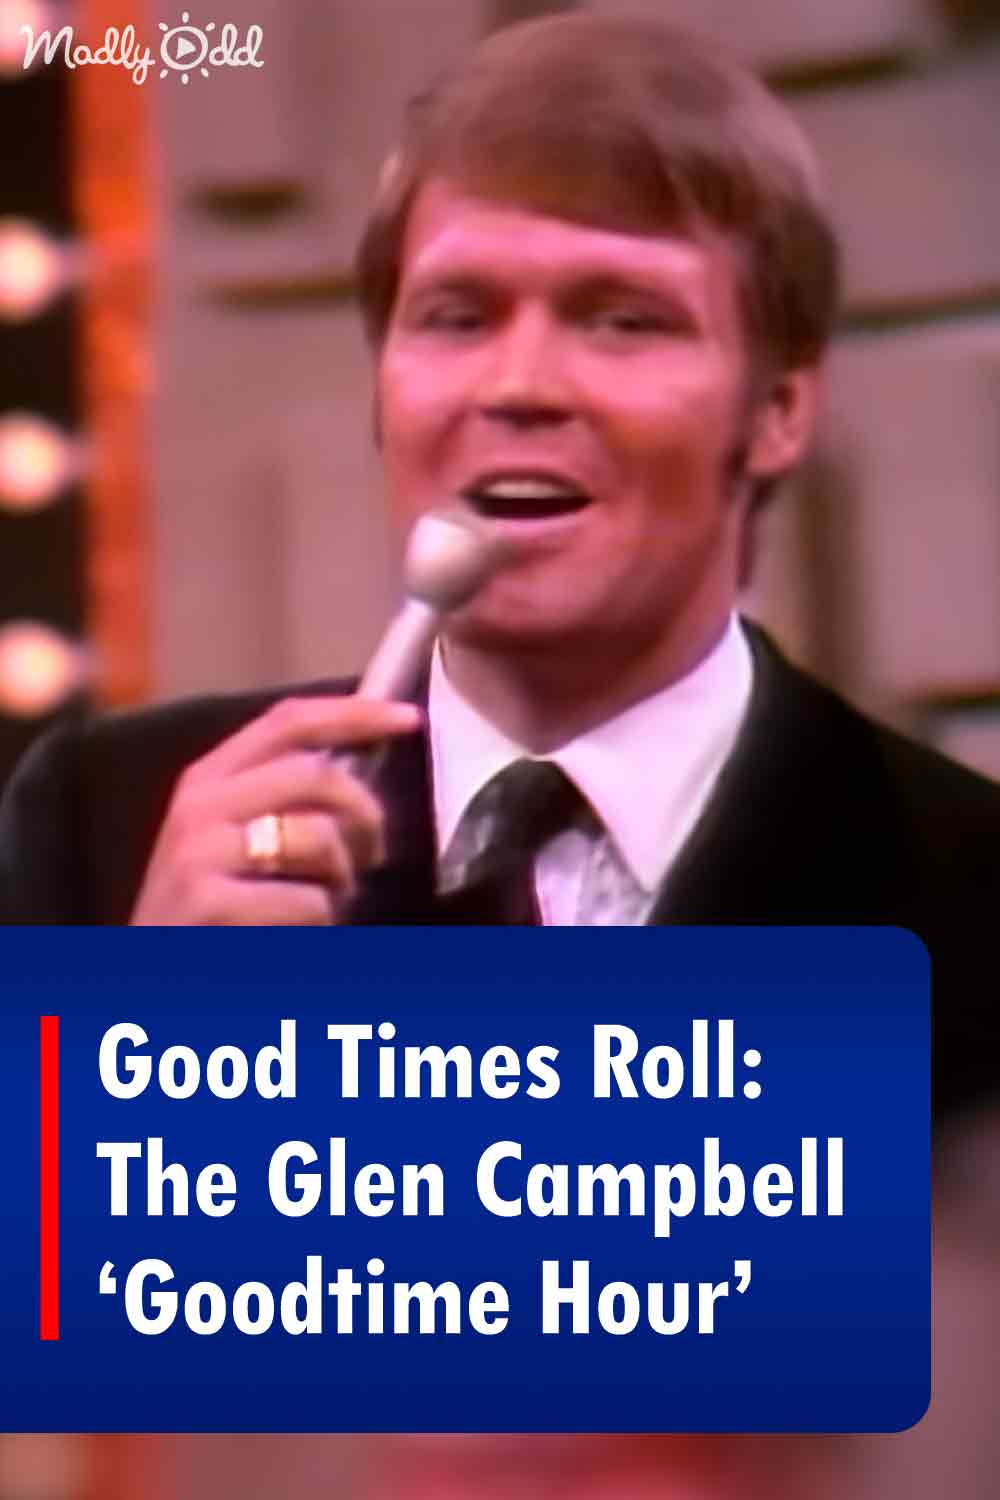 Good Times Roll: The Glen Campbell ‘Goodtime Hour’